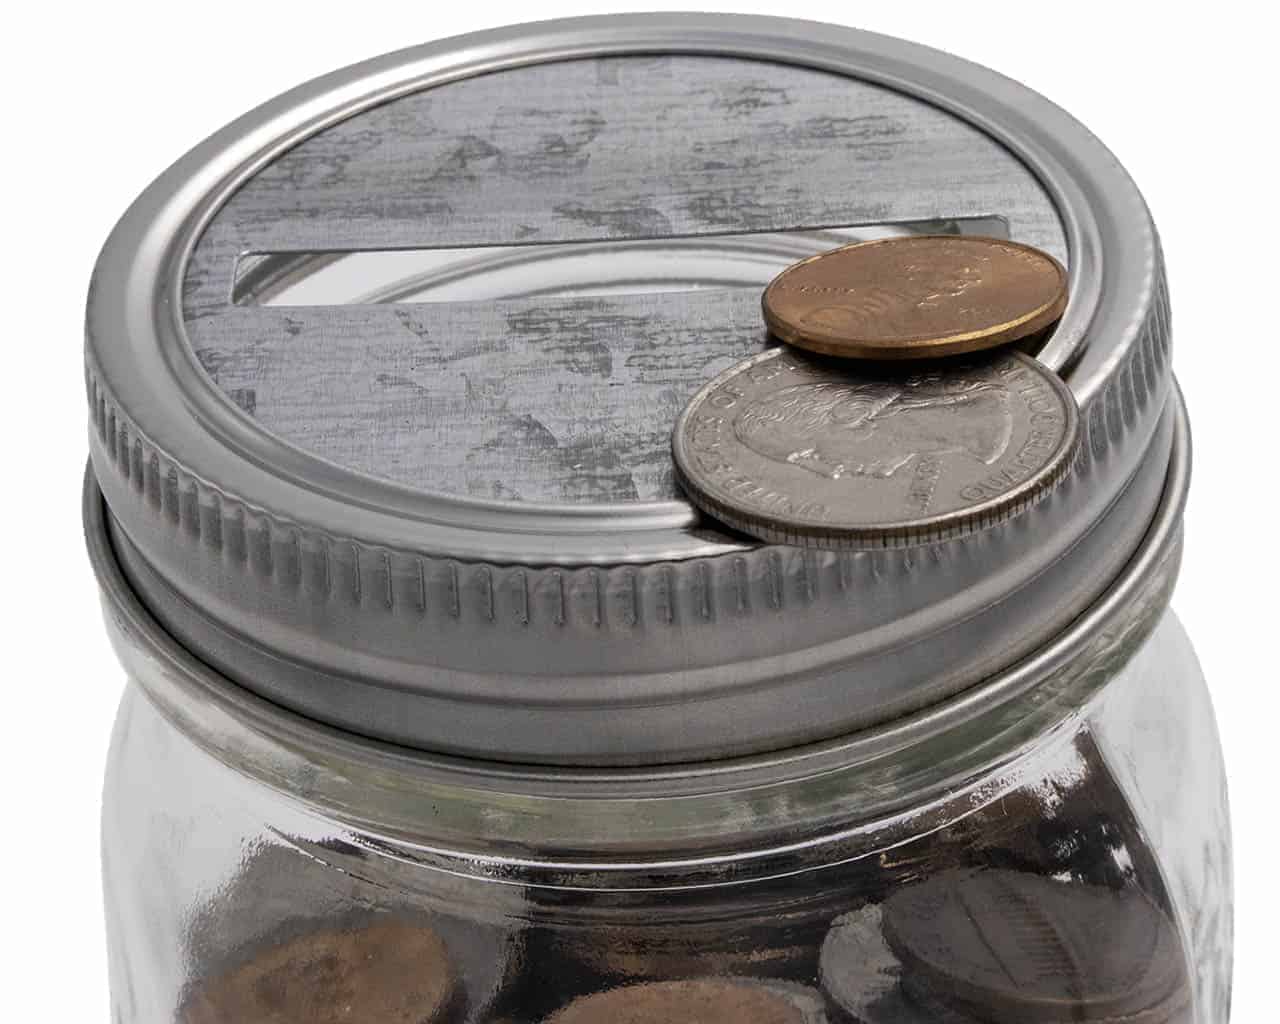 8Pcs Stainless Steel Coin Big Slot Lids Cover Inserts for Regular Mason Jars  Cap